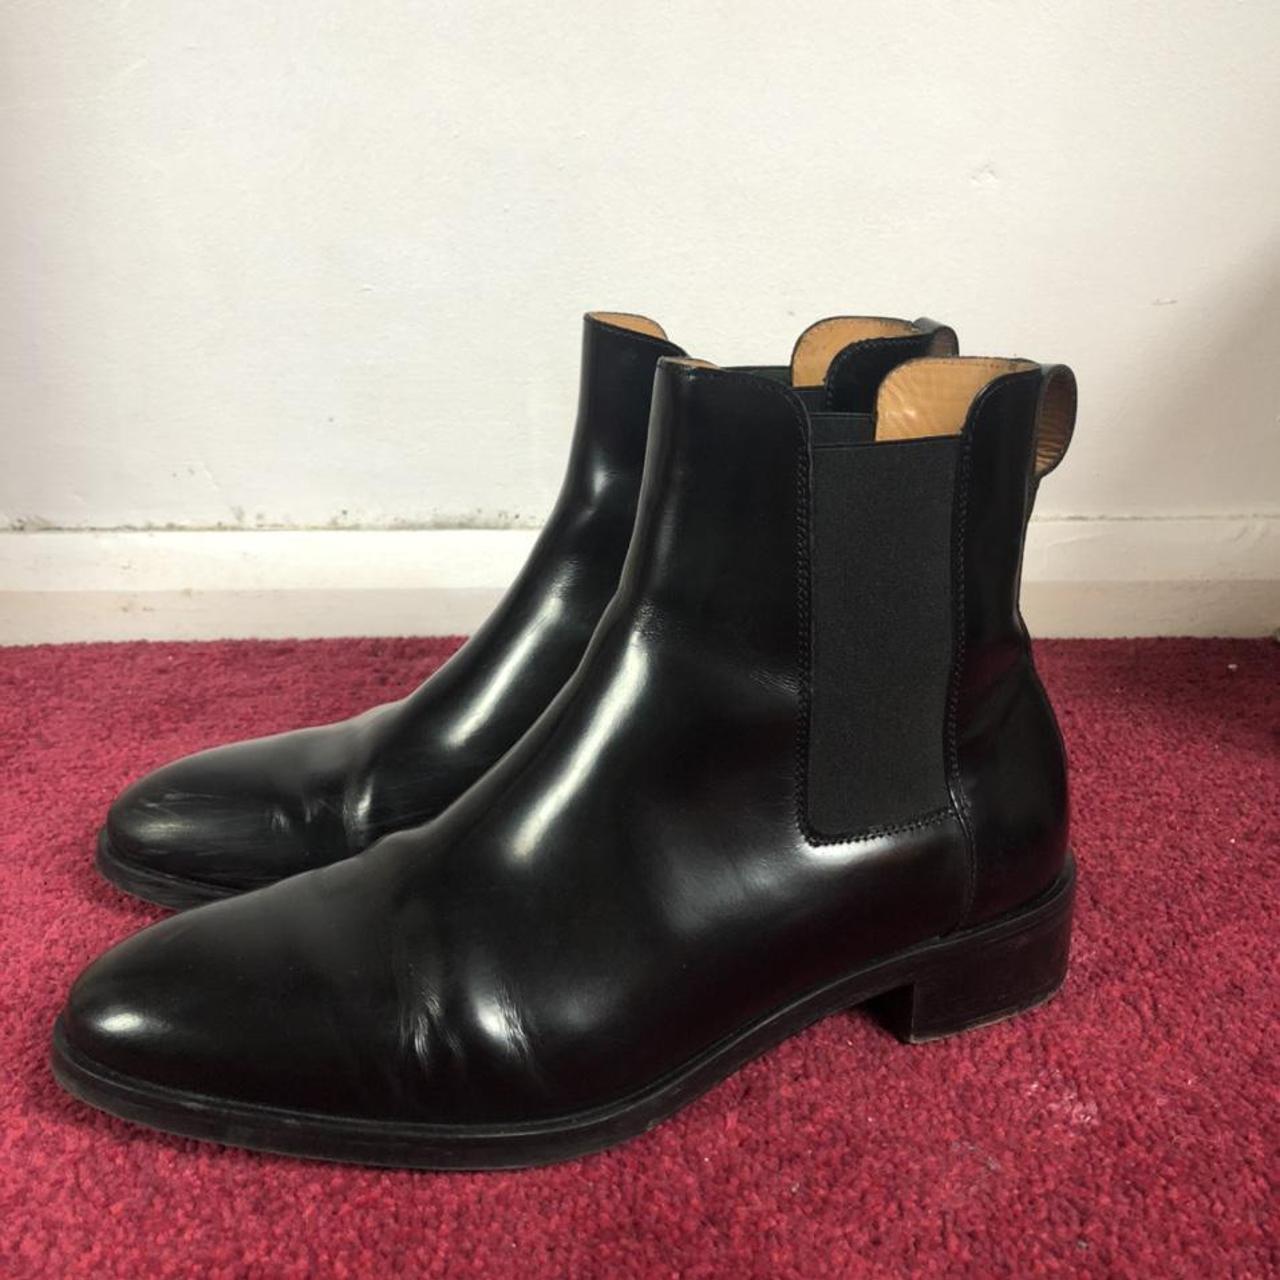 Cos black leather Chelsea boots. Really good for... - Depop